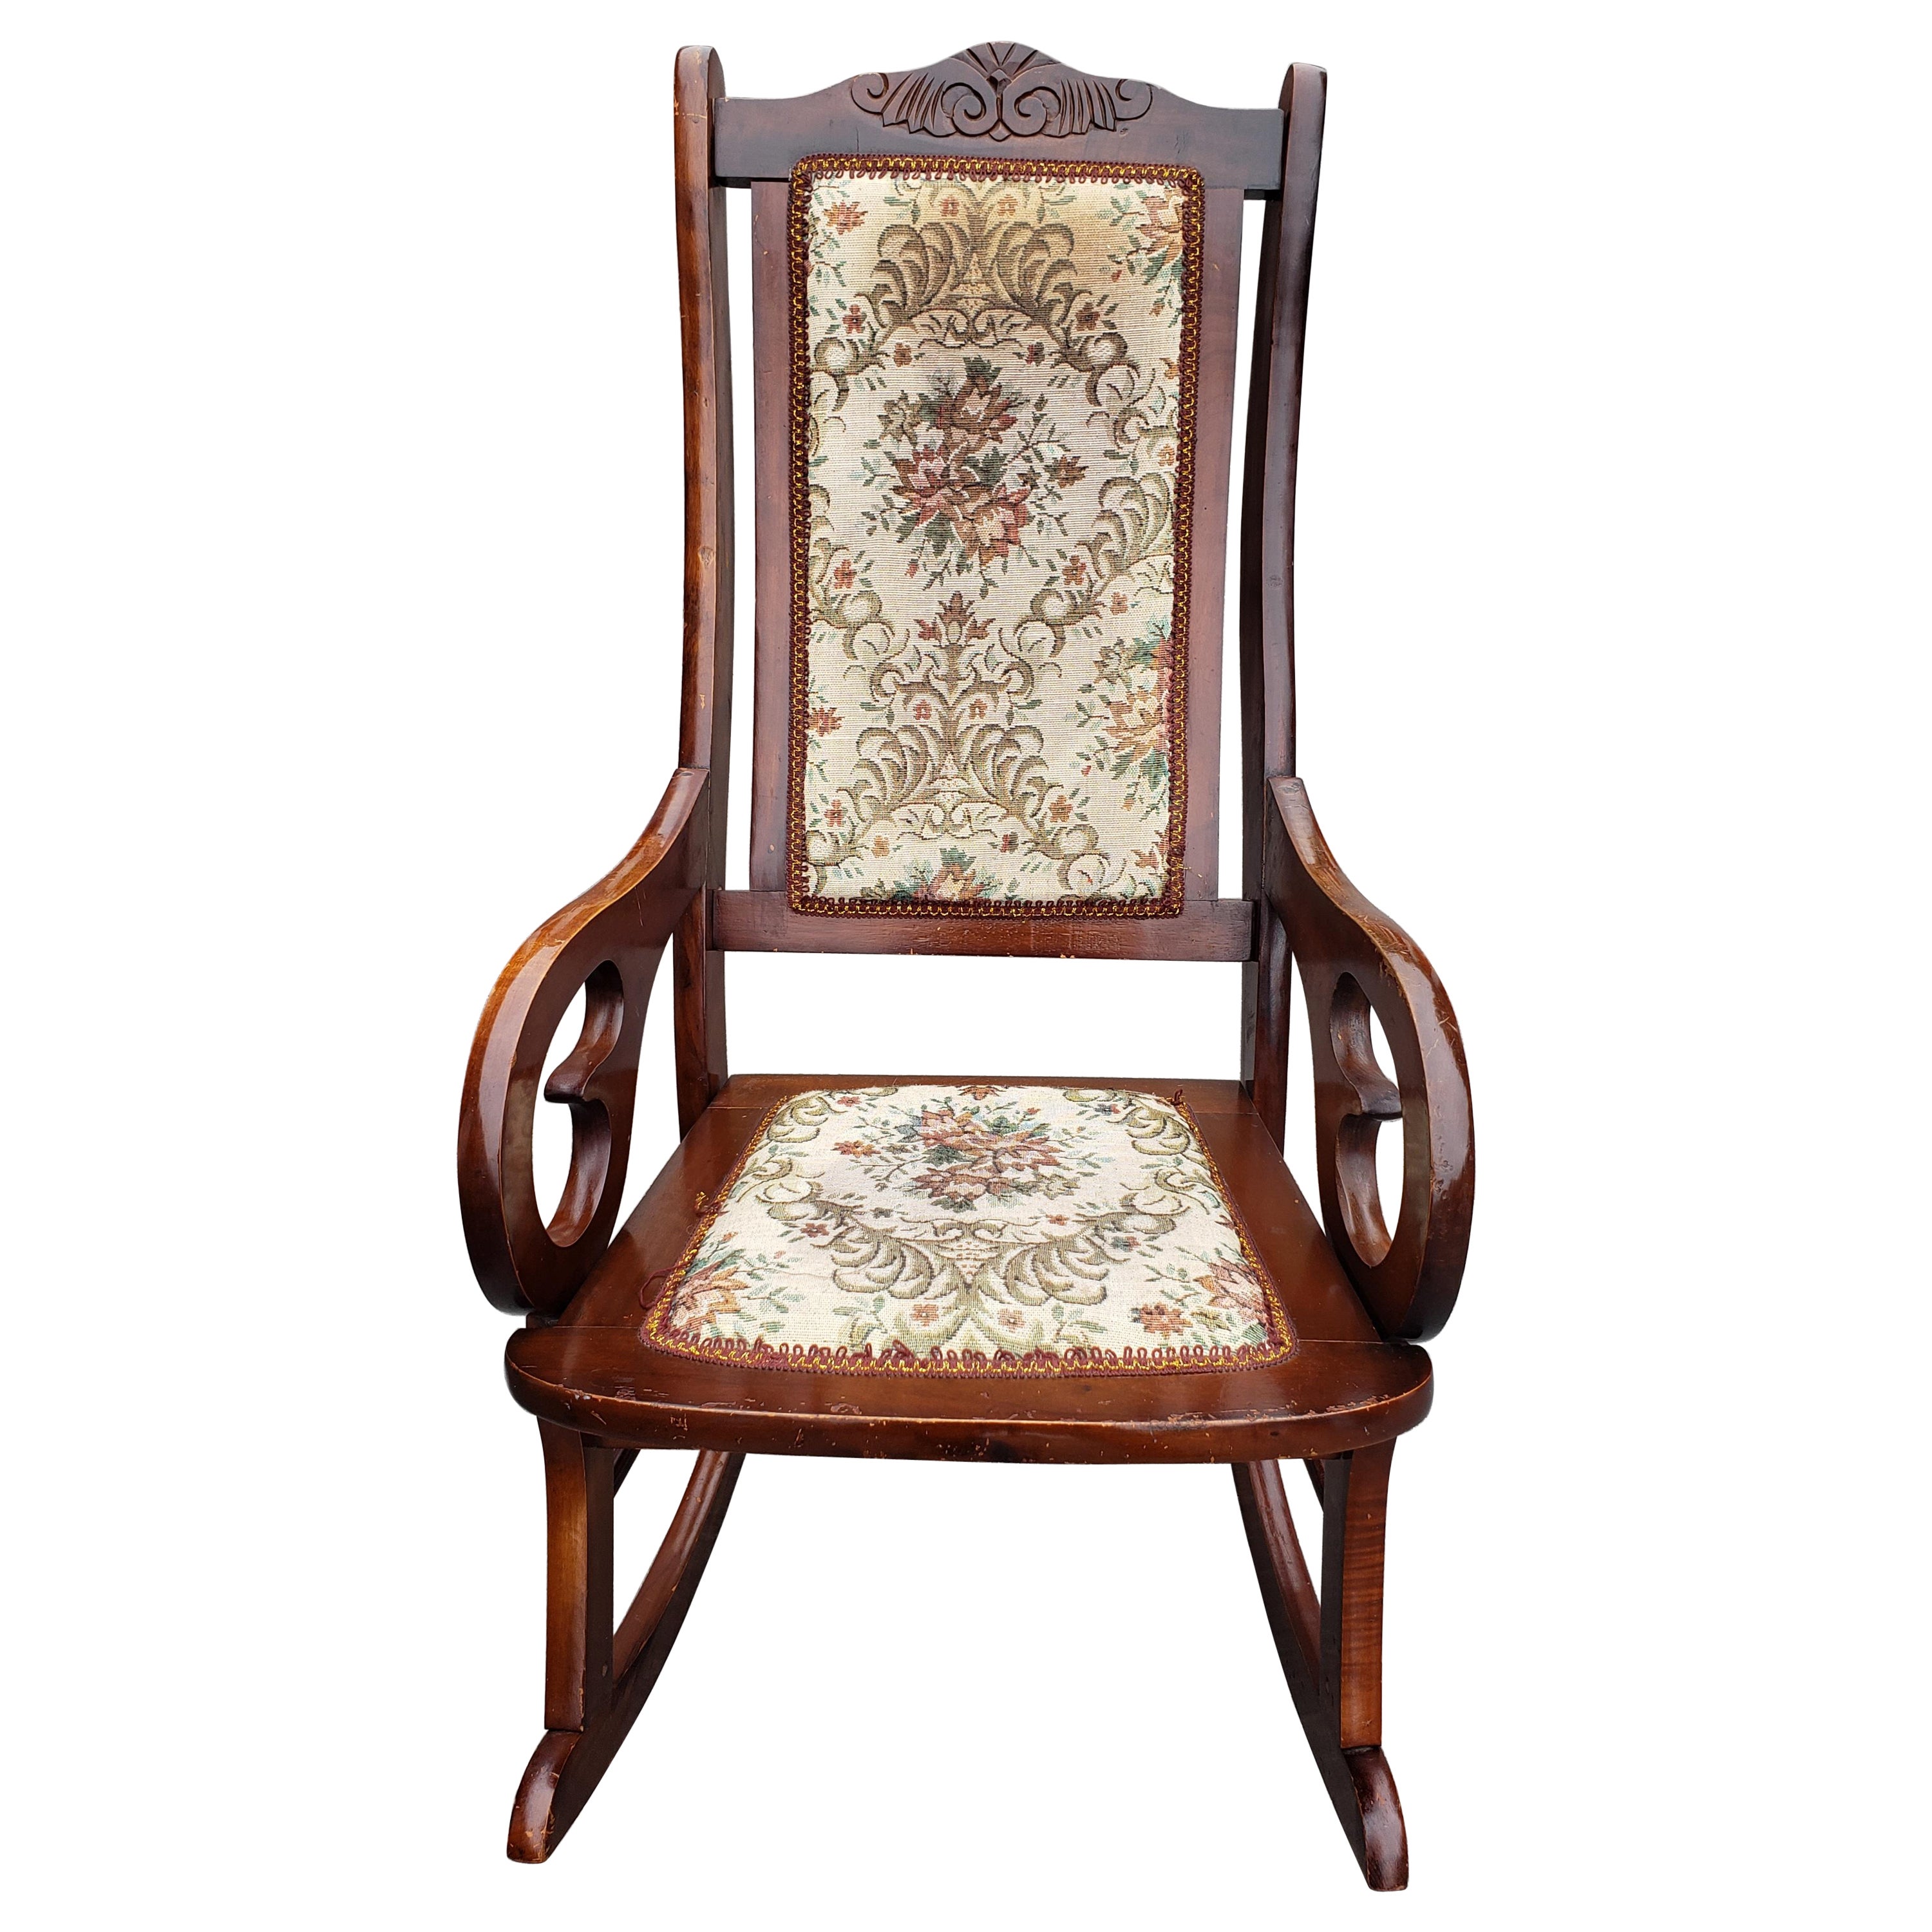 1910s Antique Biedermeier Rocking Chair in Mahogany and Needle Point Upholstery